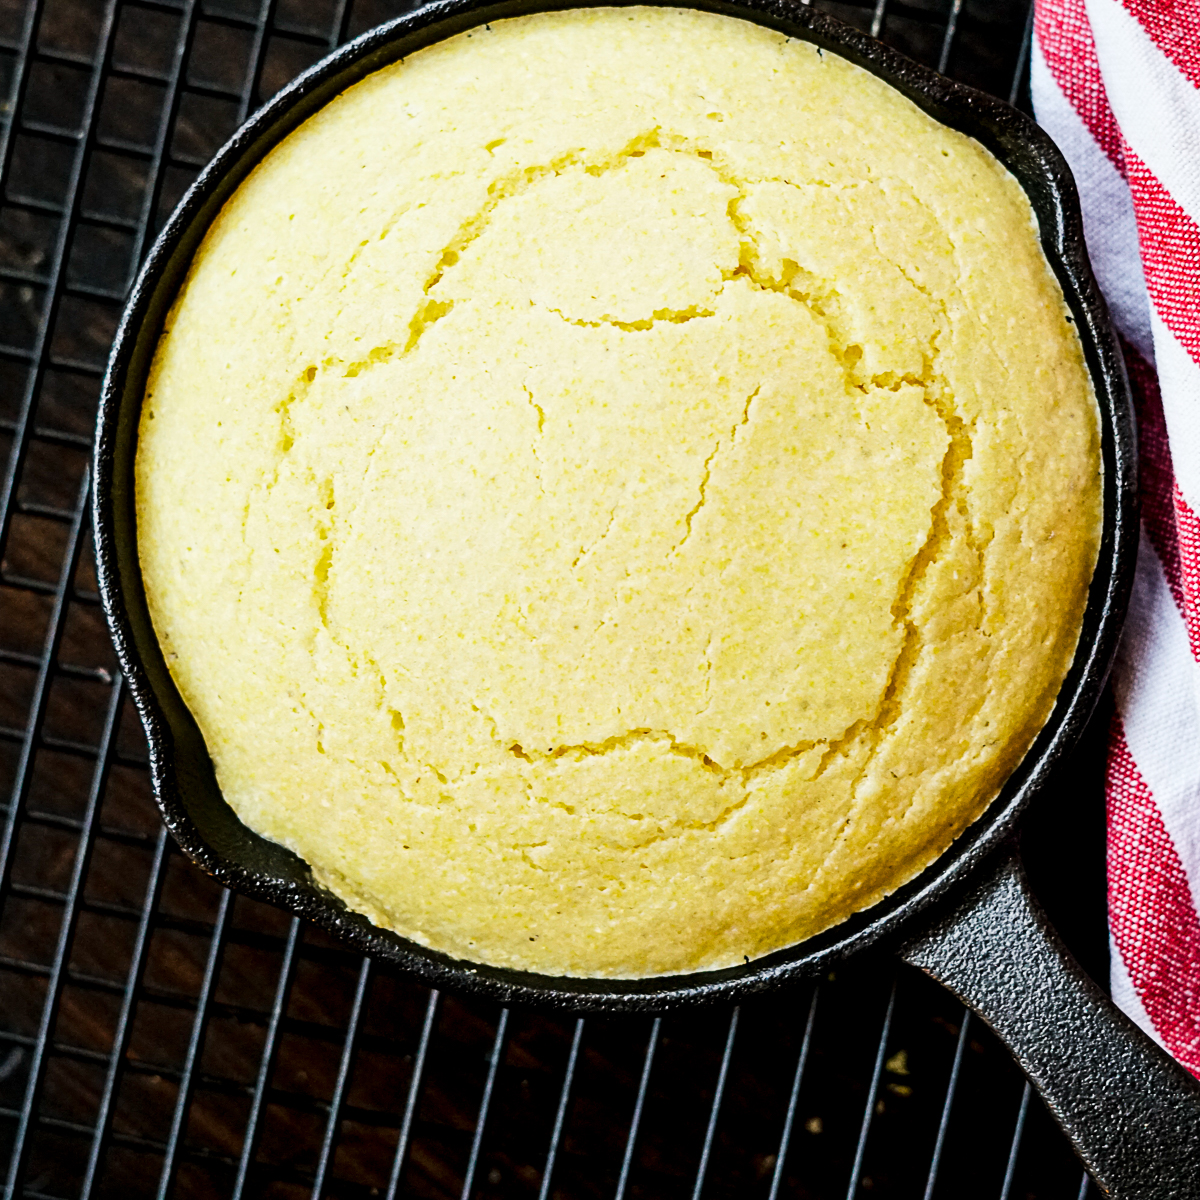 Dairy Free Cracker Barrel Cornbread Muffins Copycat Recipe in a cast iron skillet on a wire rack with a red and white striped towel